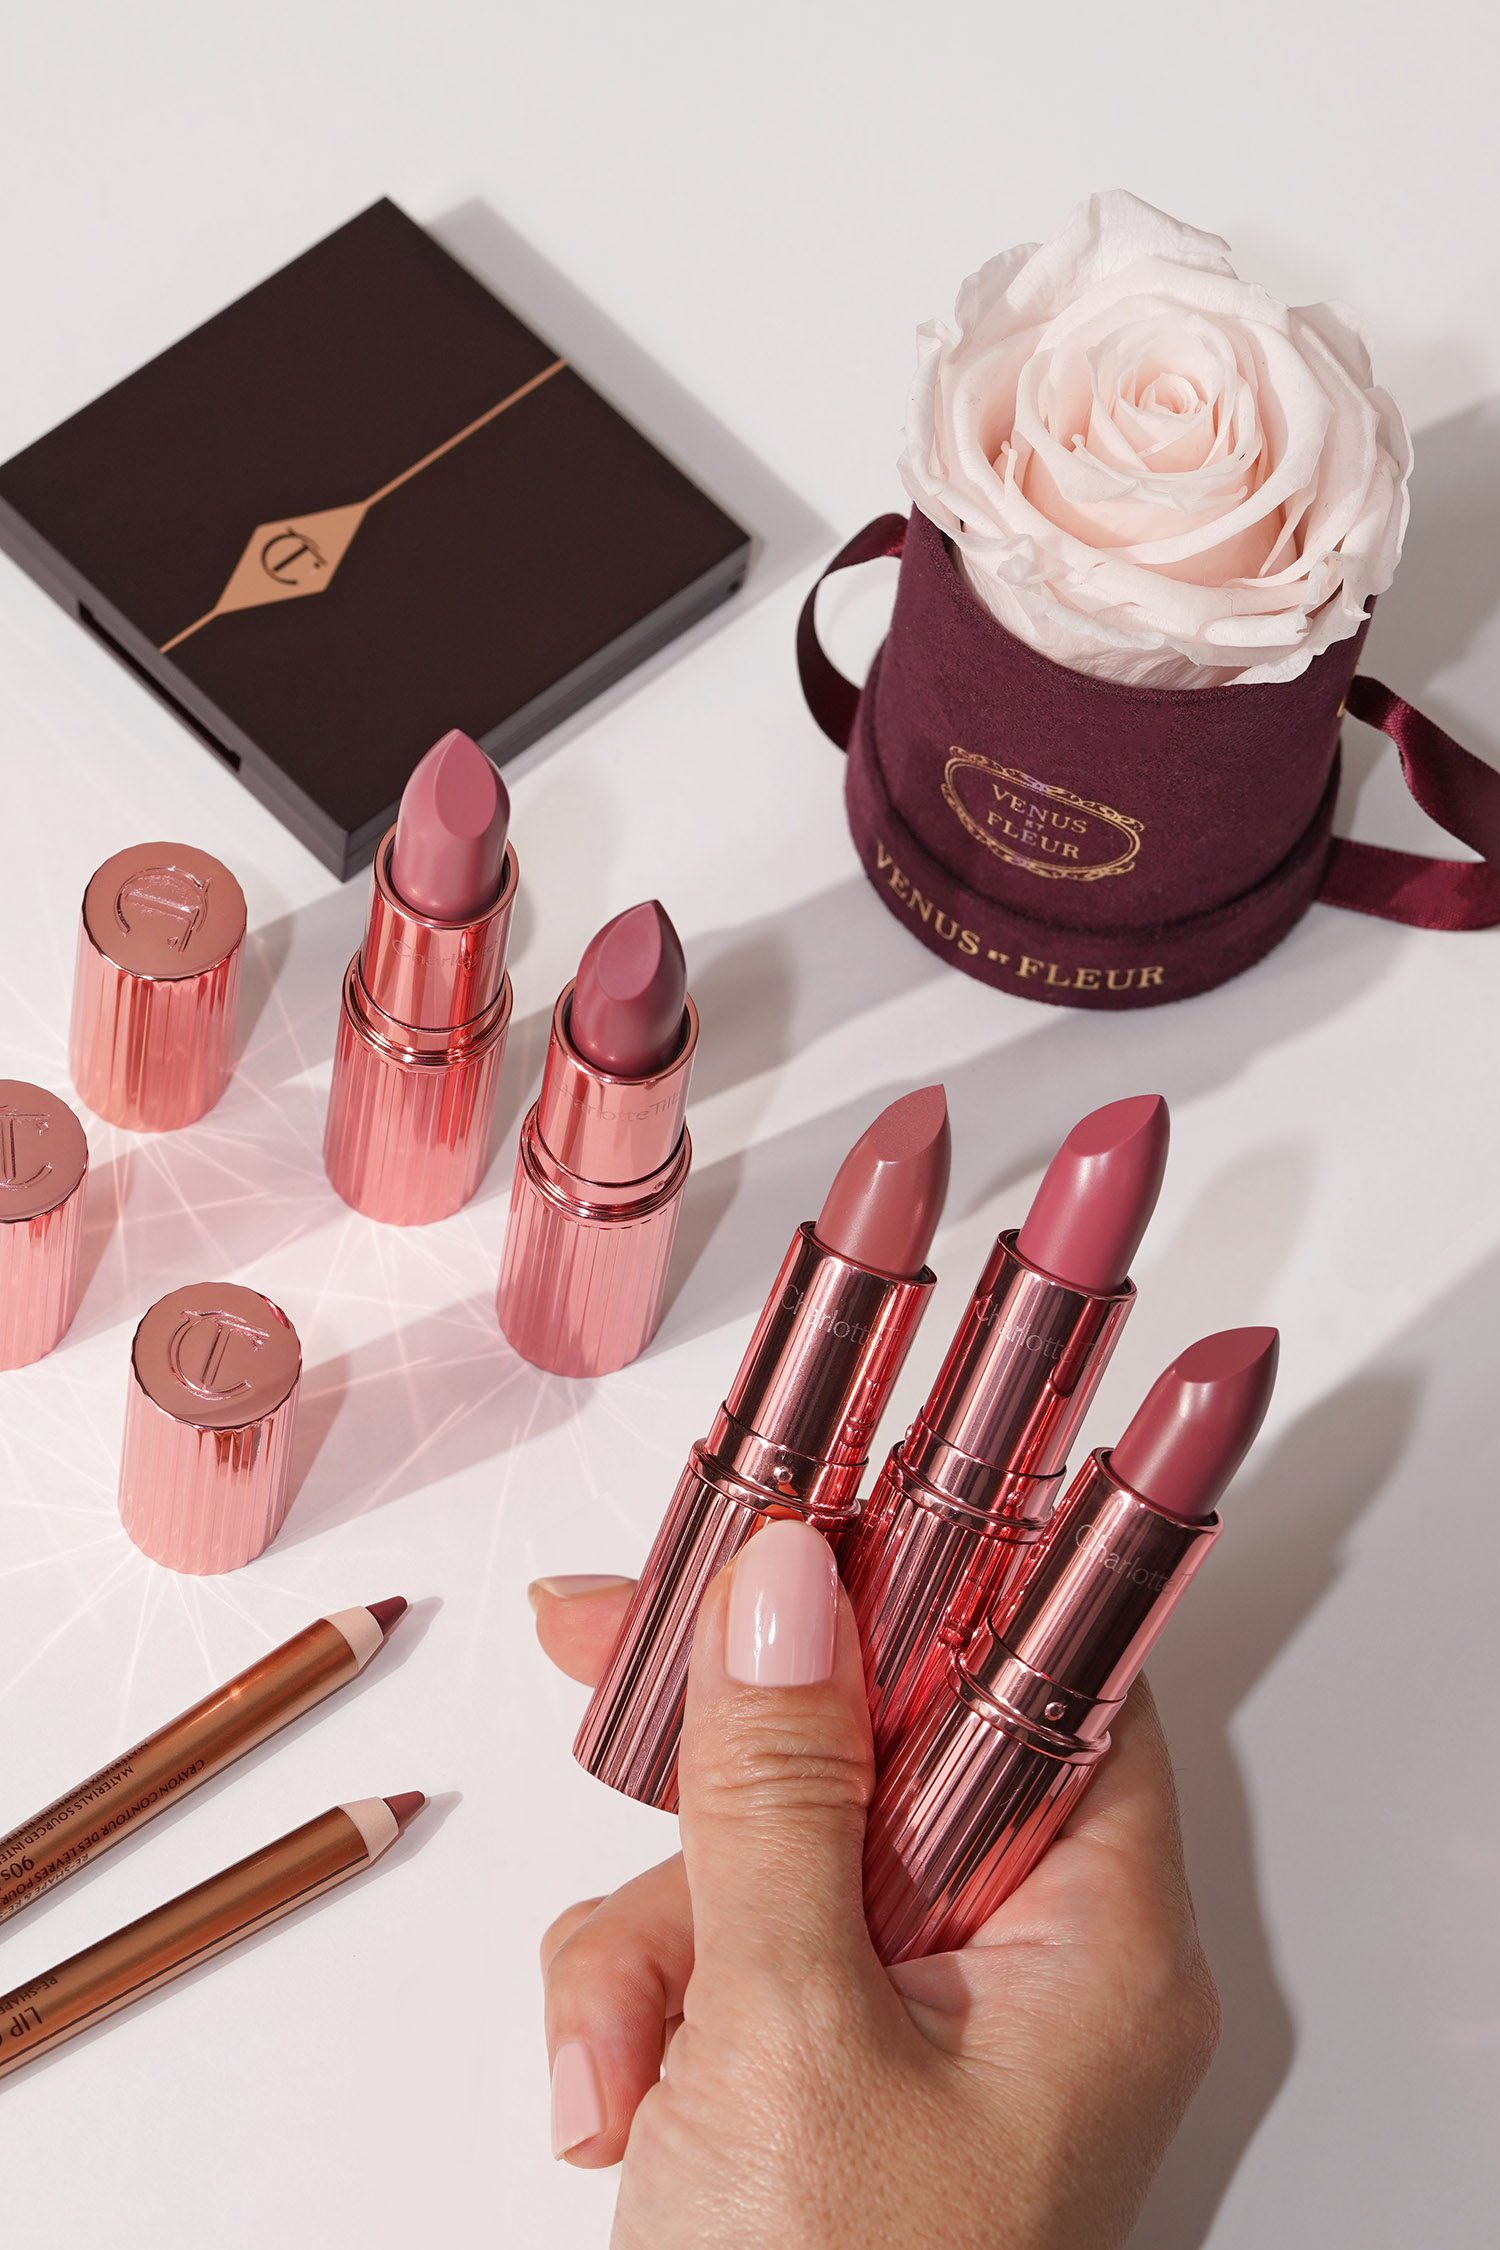 Charlotte Tilbury Launches Old Hollywood-Inspired Red and Pink Lipsticks